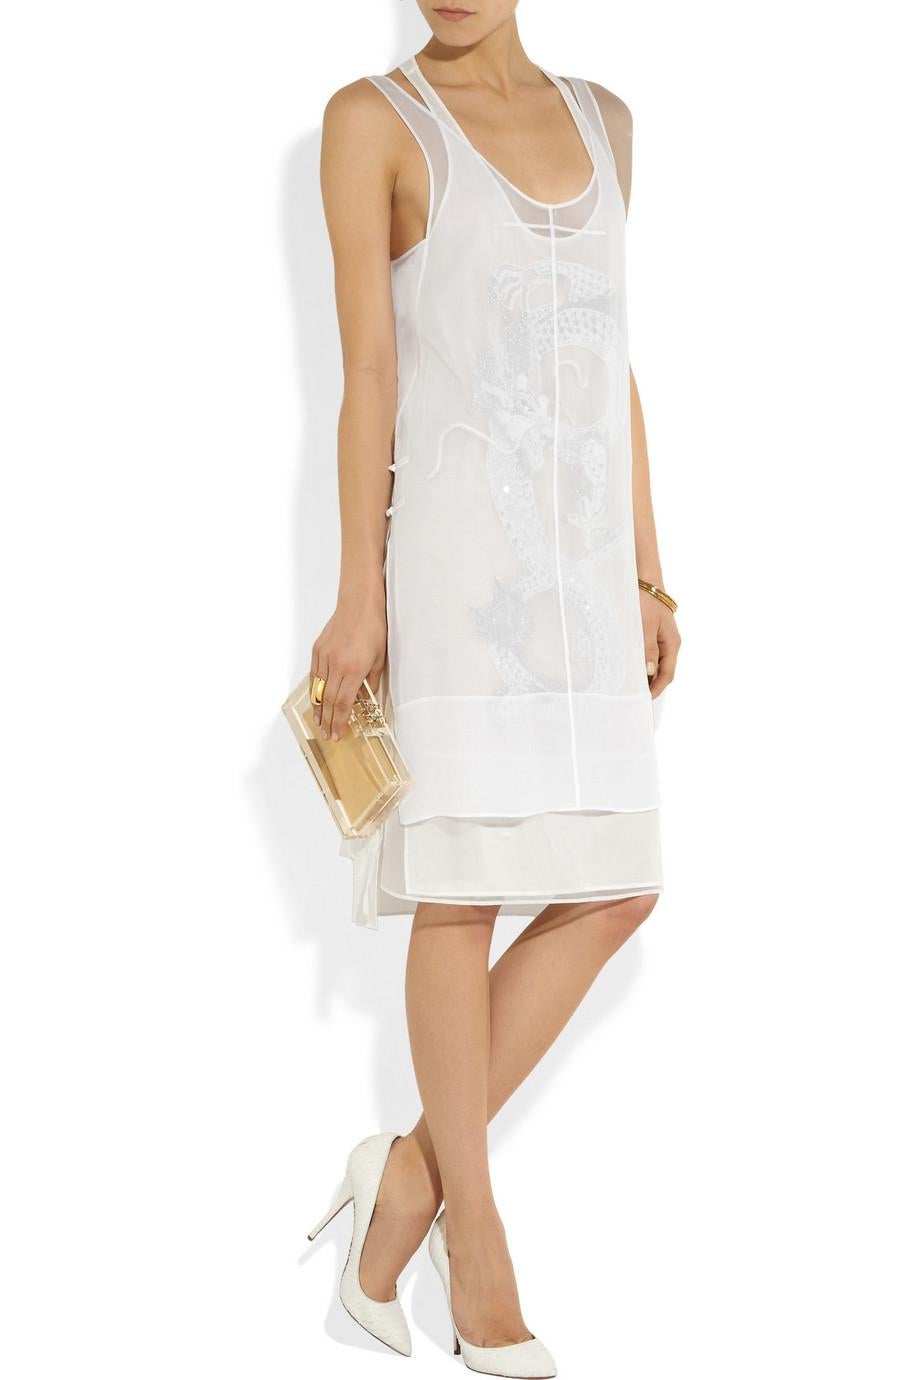 This Emilio Pucci dress combines light, sheer fabric with a curve-hugging silhouette, for a look that is both glamorous and leisurely. Intricate embroidery inspired by Vietnamese art add compelling visual complexity.

A layer of sheer silk-chiffon